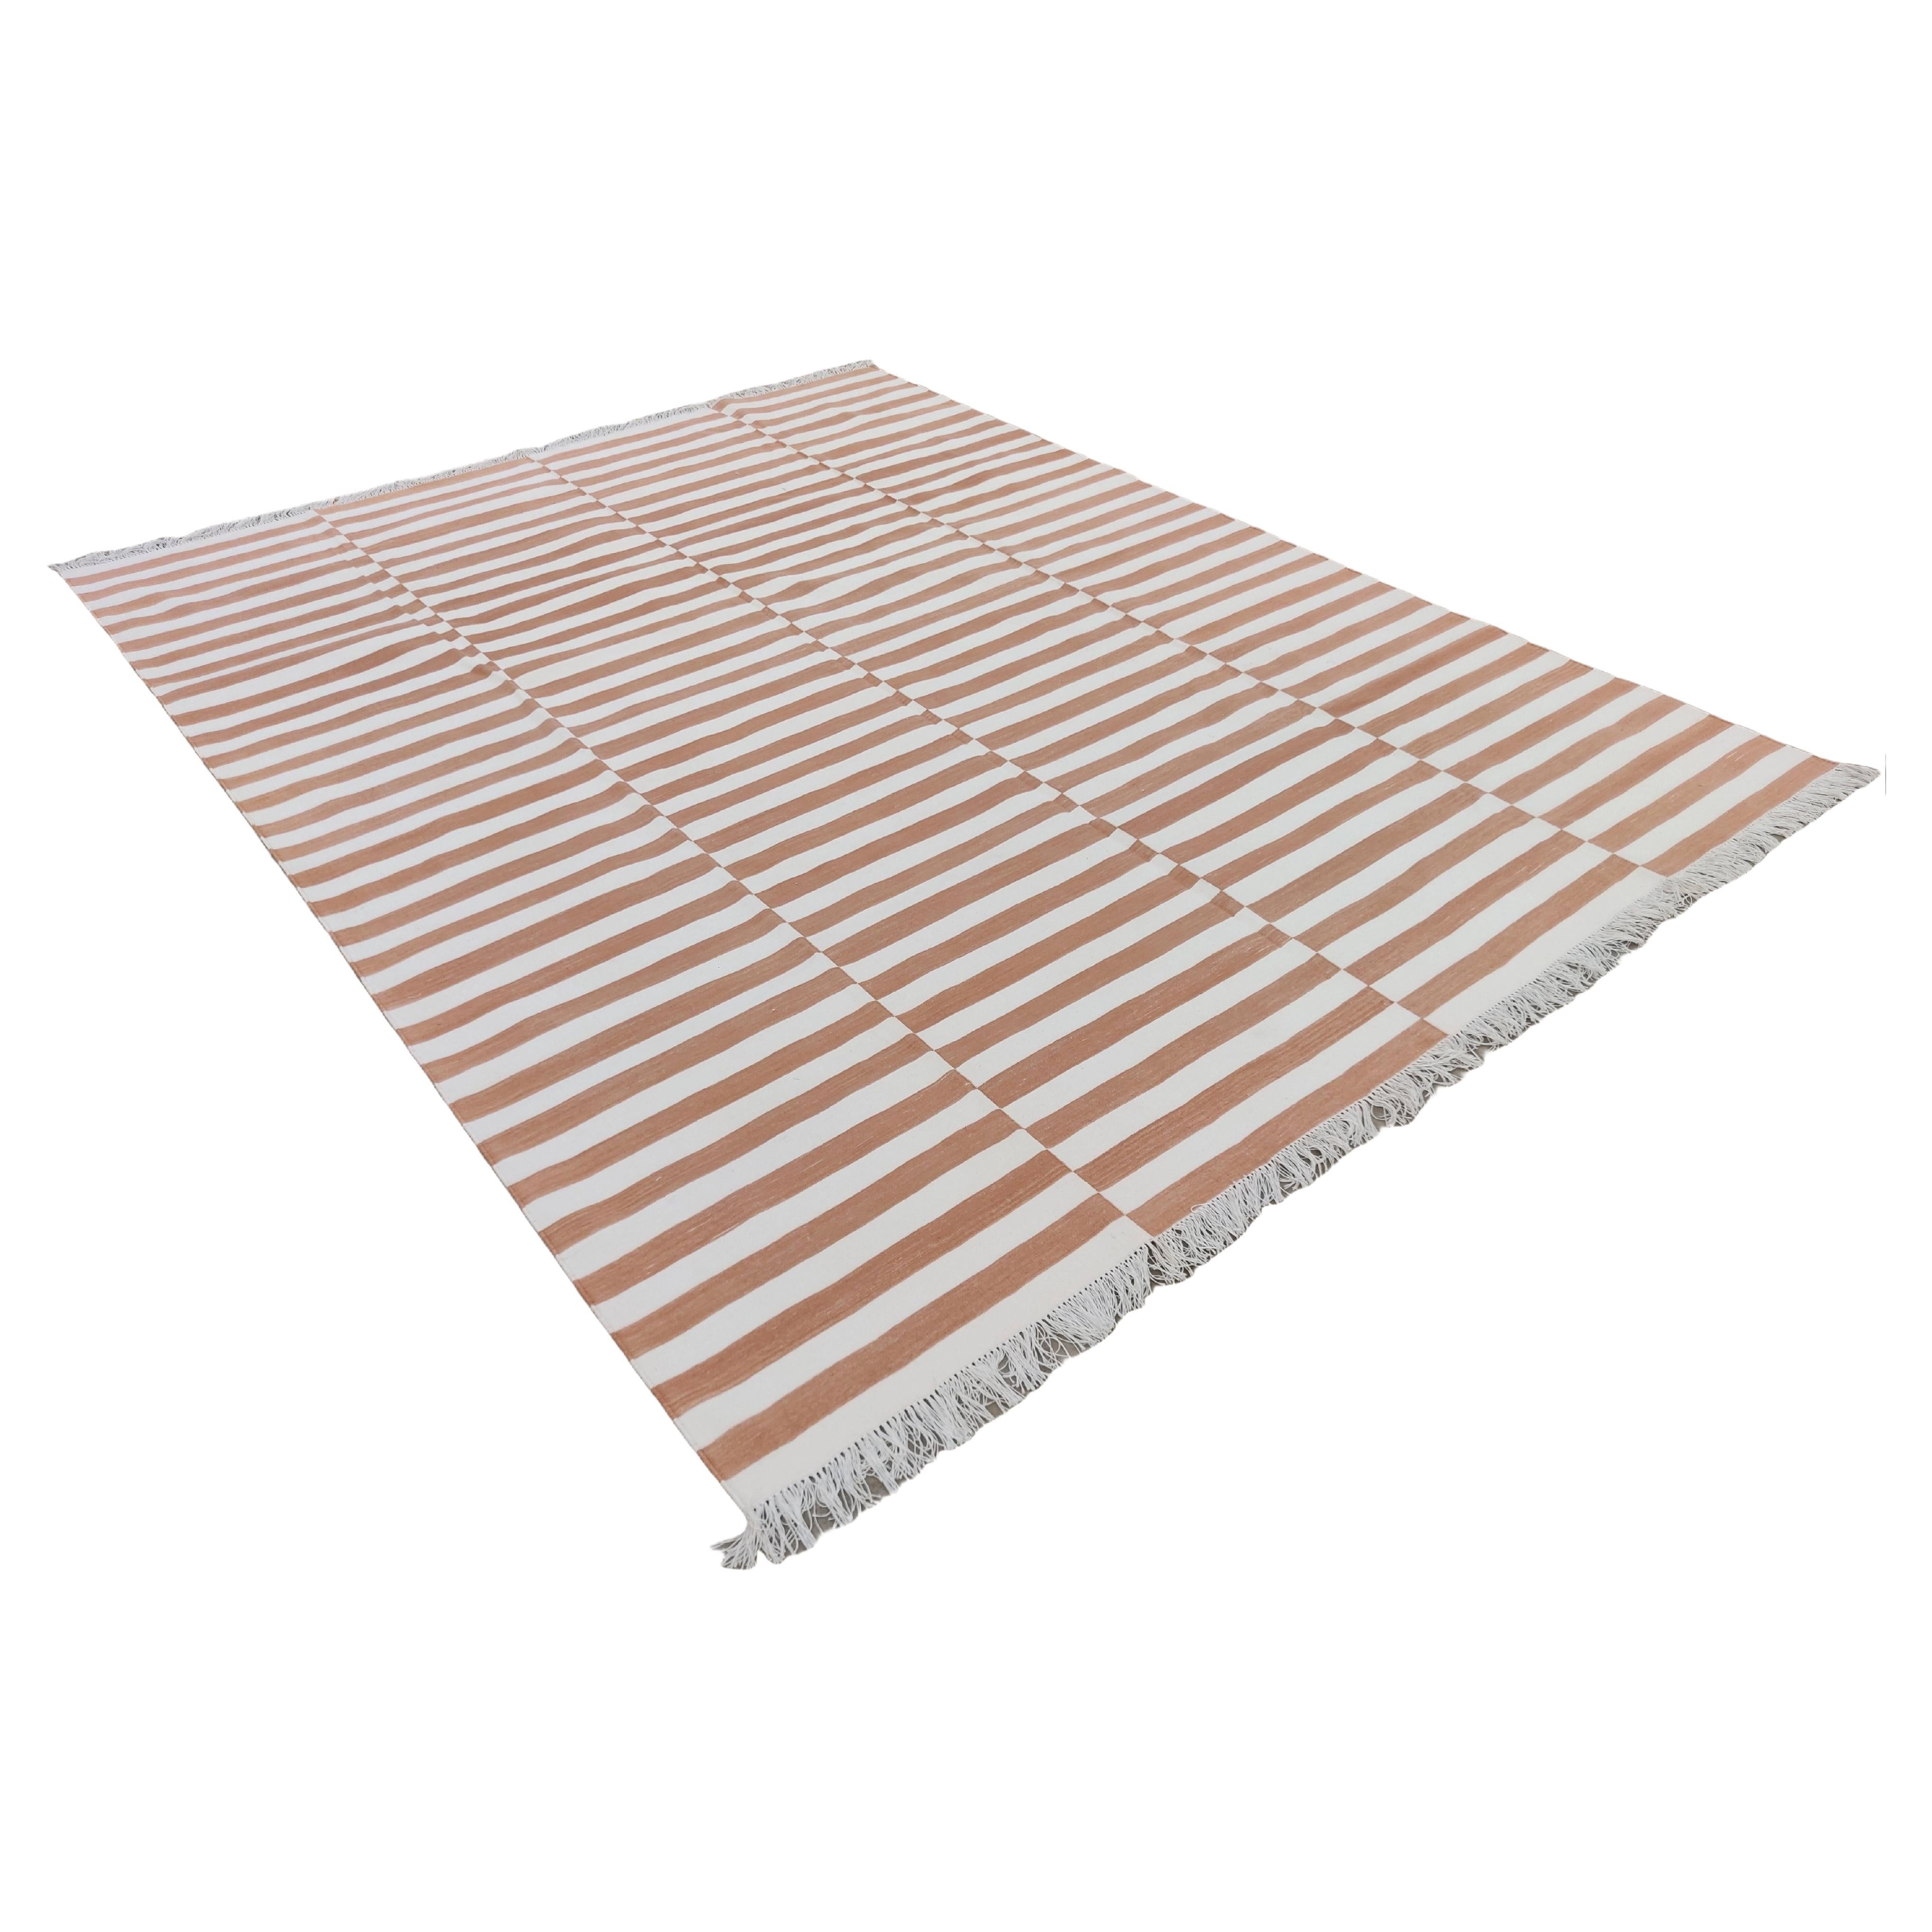 Handmade Cotton Area Flat Weave Rug, Tan & White Up down Striped Indian Dhurrie For Sale